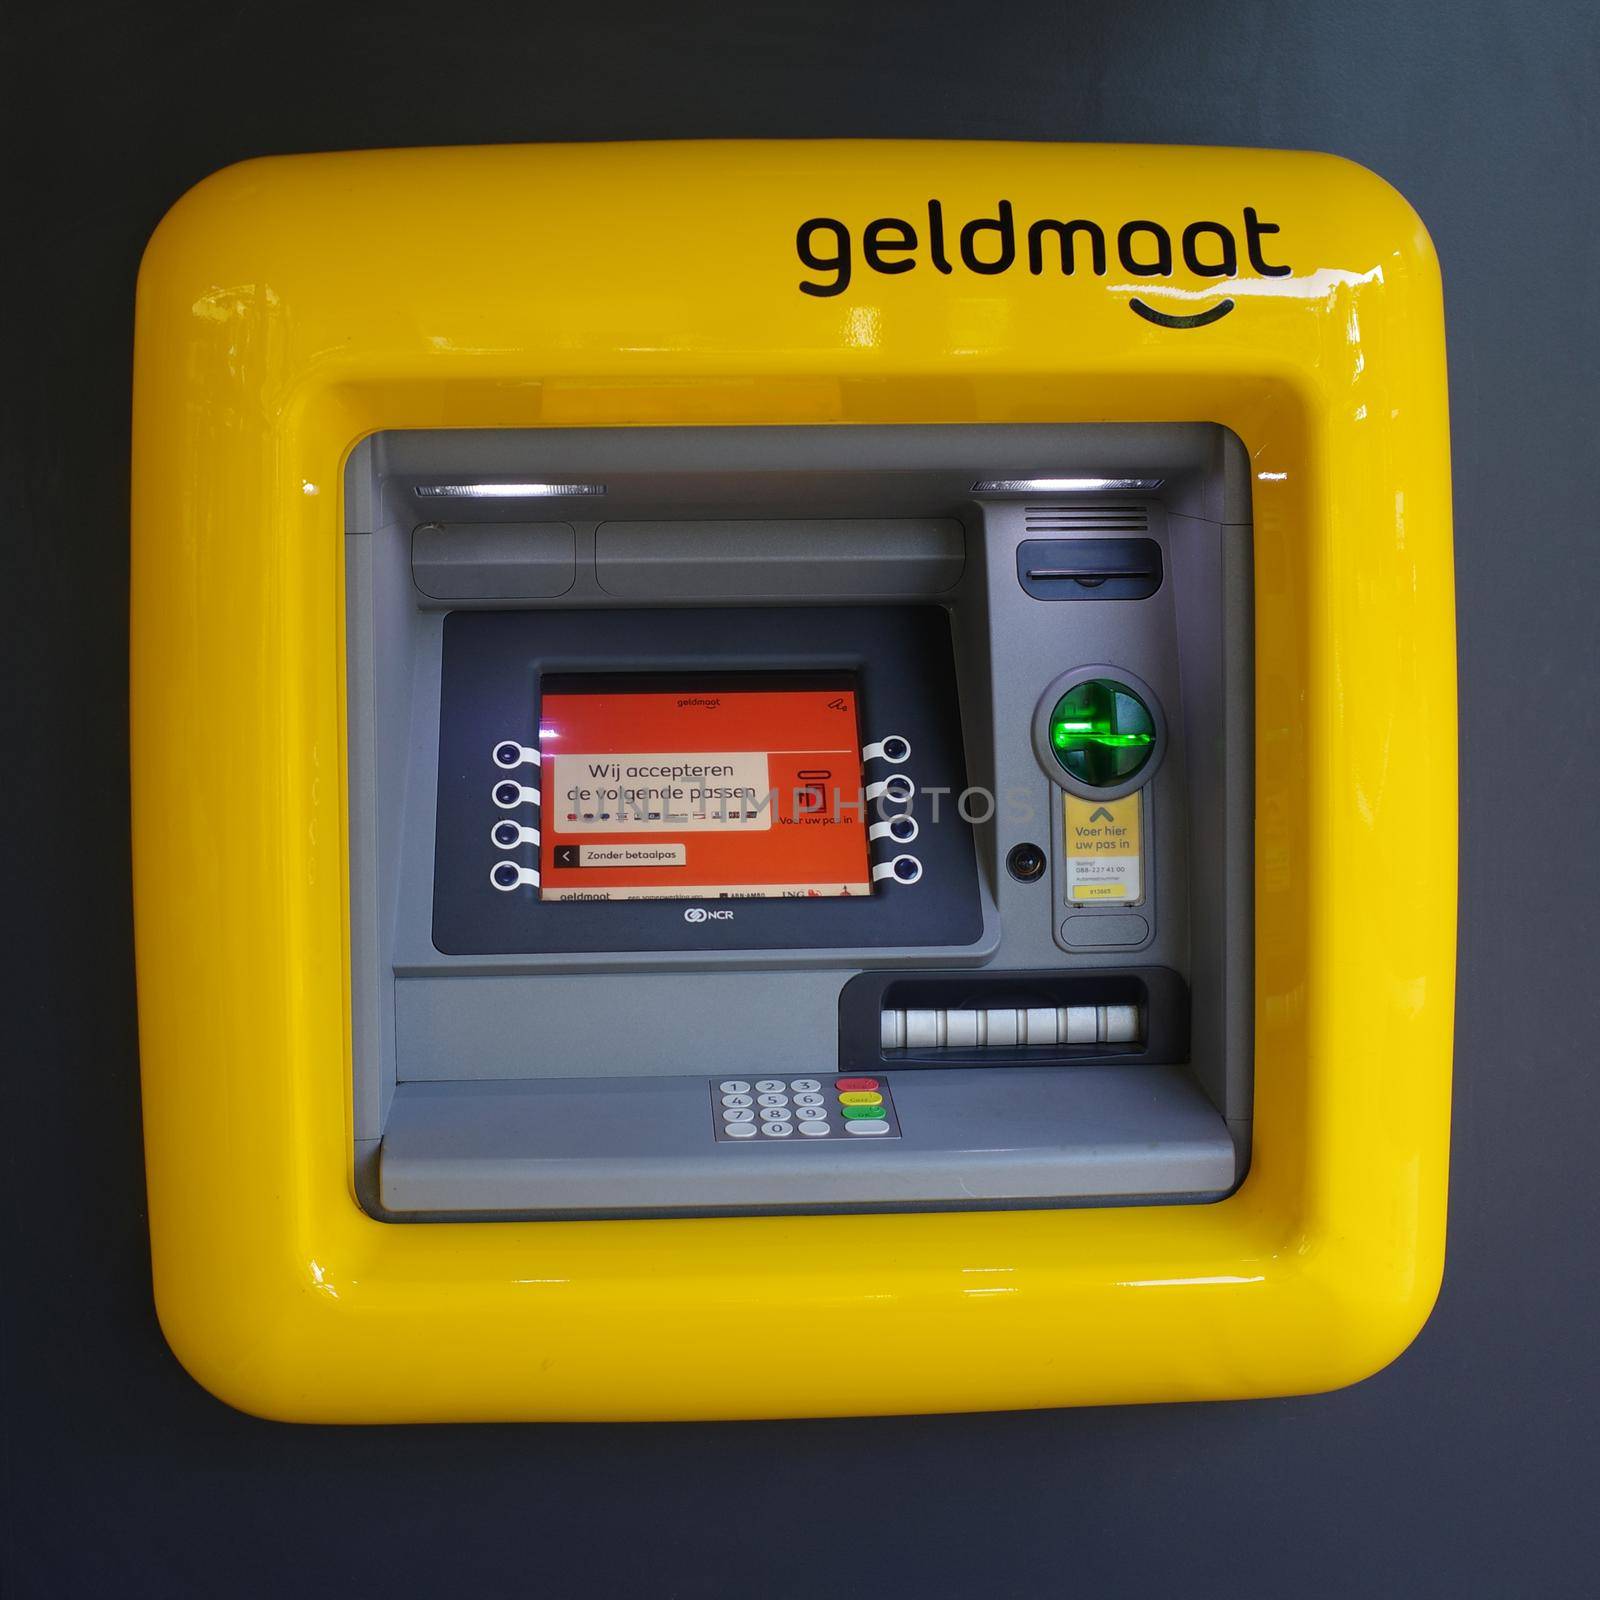 Mariaparochie, The Netherlands - Aug 28 2022 An ATM of 'Geldmaat'. This is a Dutch company that manages ATMs. The banks ABN AMRO, ING and Rabobank are shareholders in this company